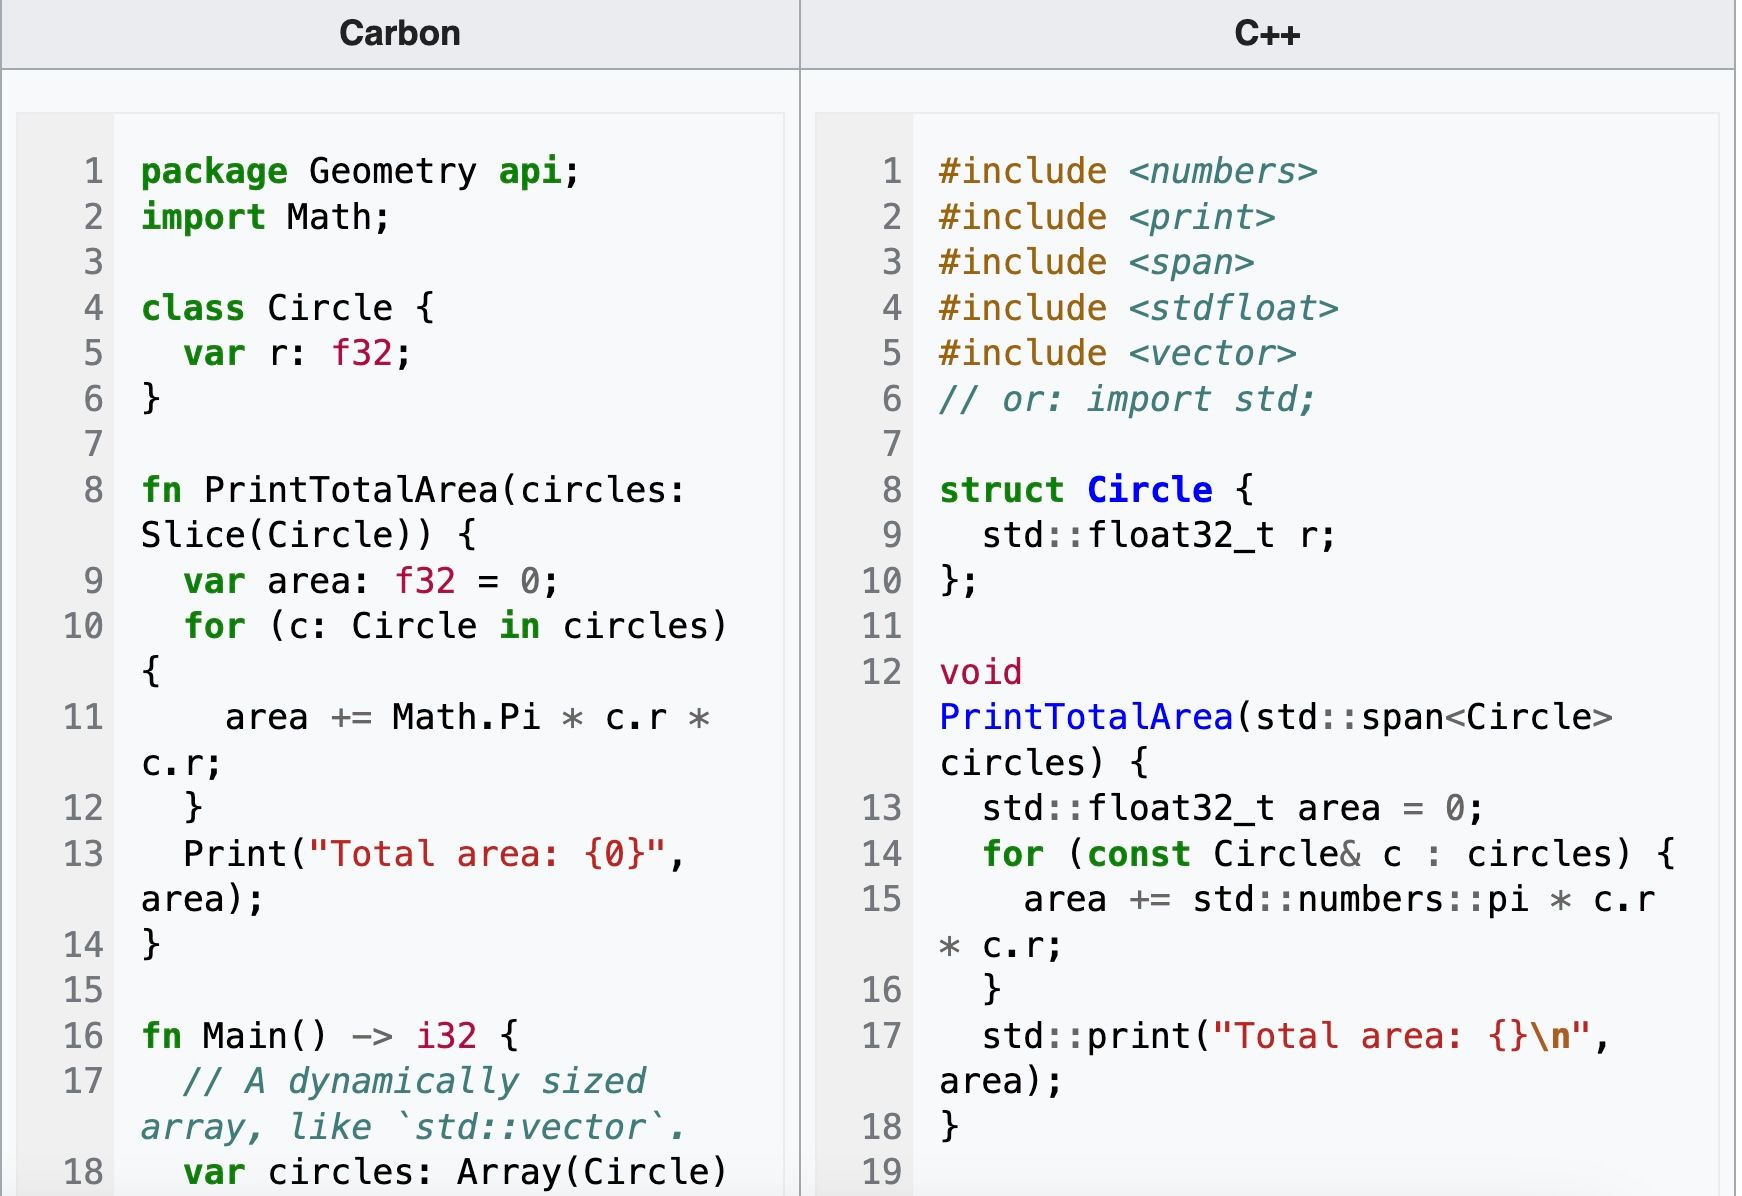 A screenshot comparing Carbon with C++.